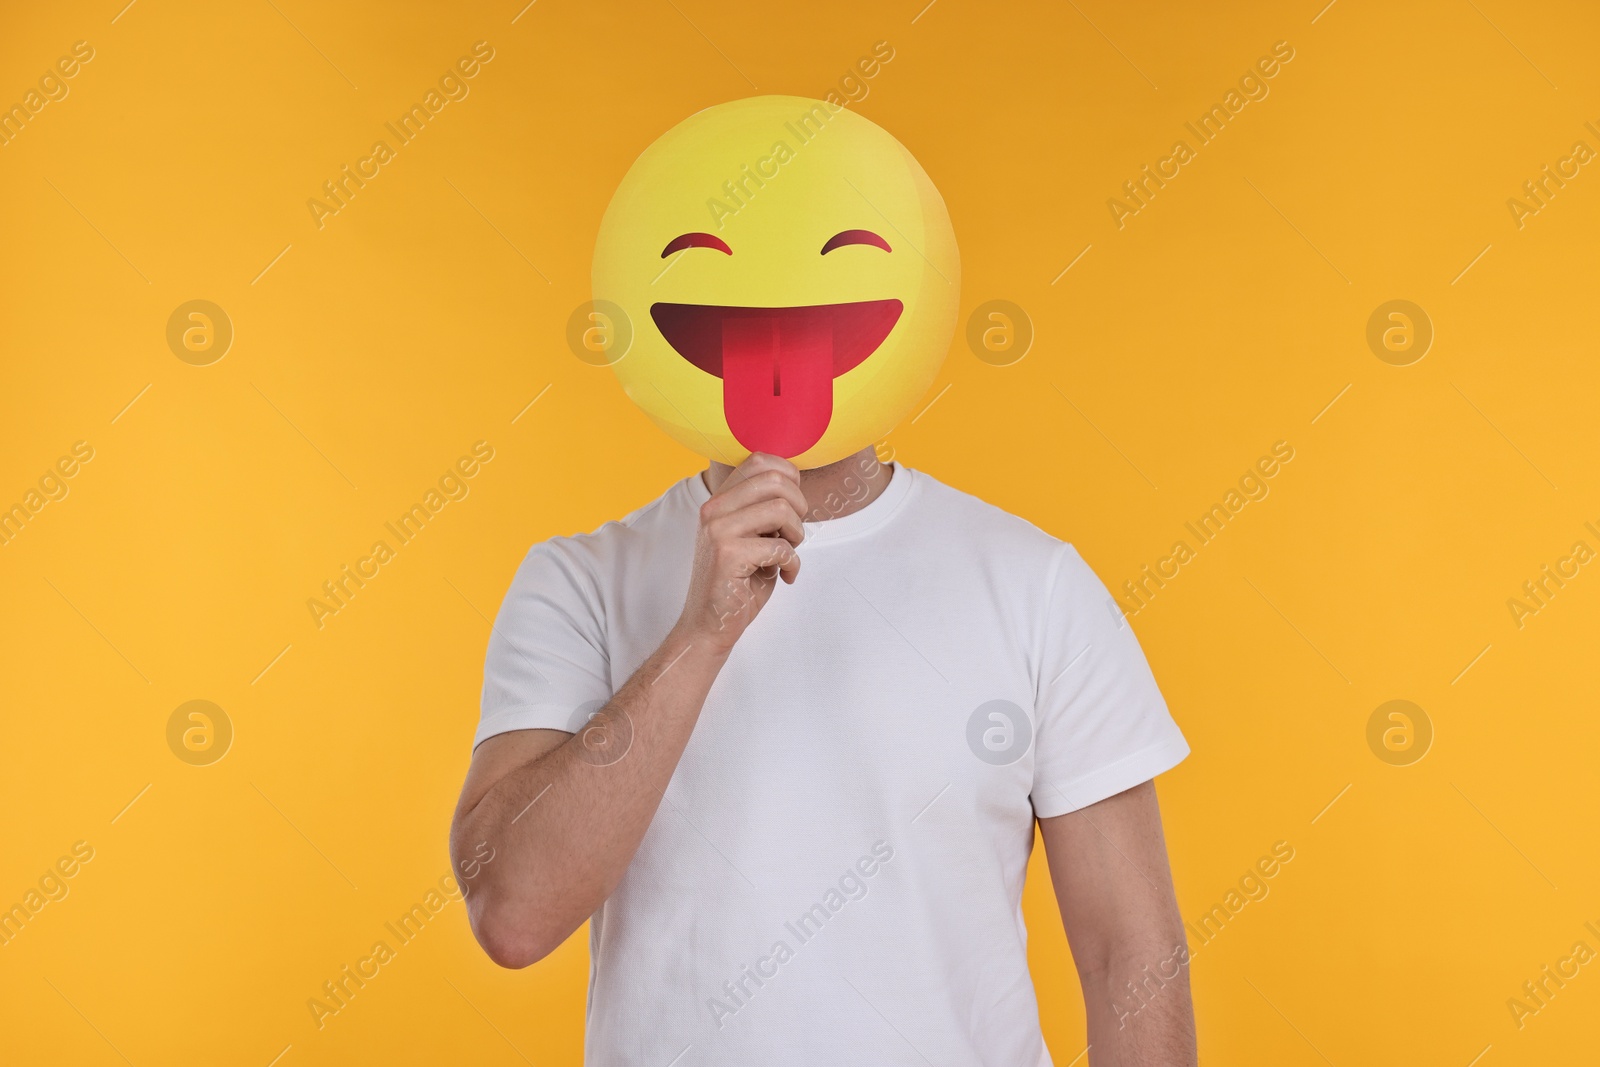 Photo of Man covering face with emoticon sticking out tongue on yellow background